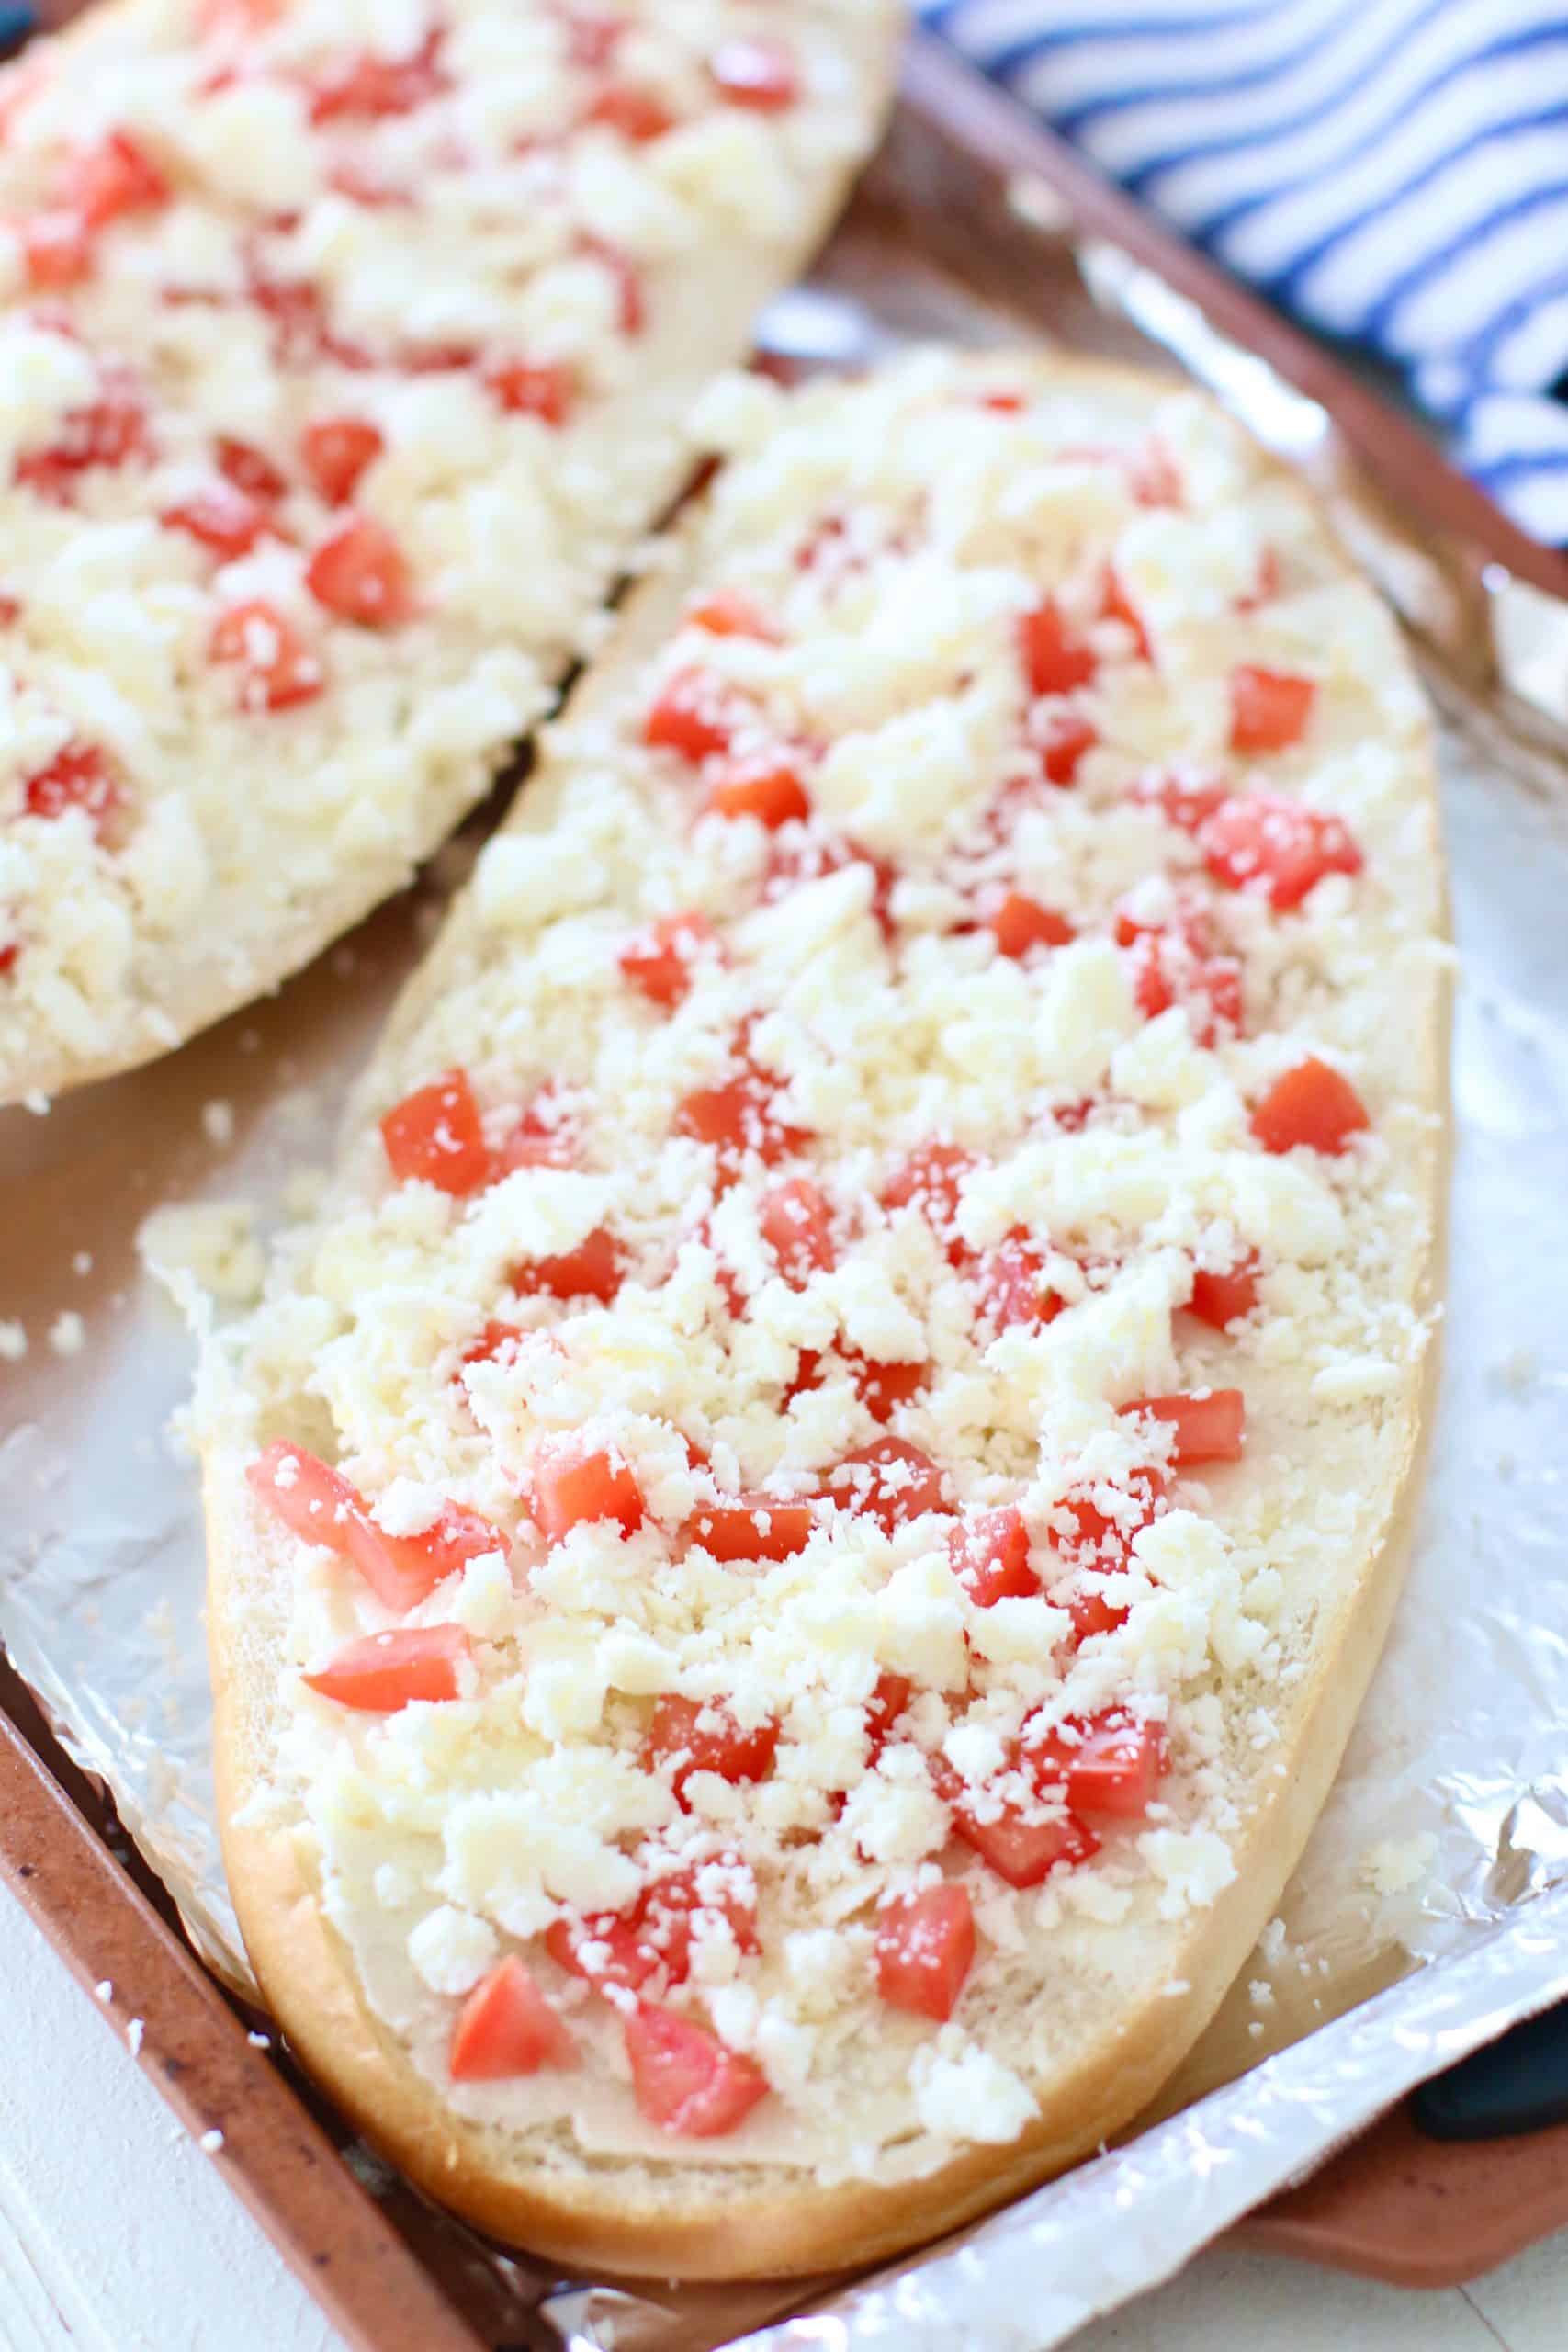 crumbled queso fresco sprinkled evenly on diced tomato layer.